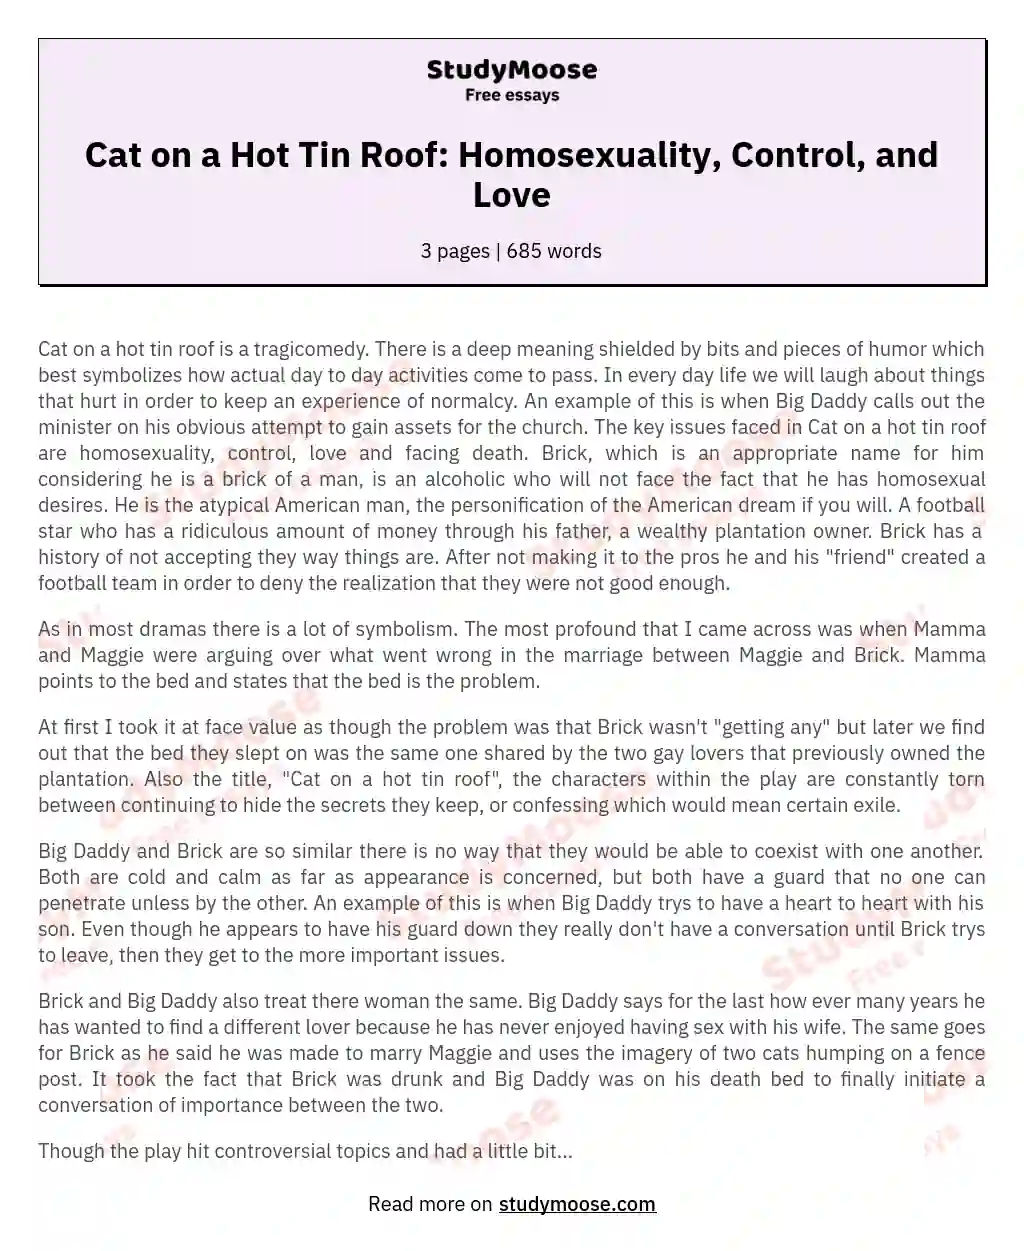 Cat on a Hot Tin Roof: Homosexuality, Control, and Love essay